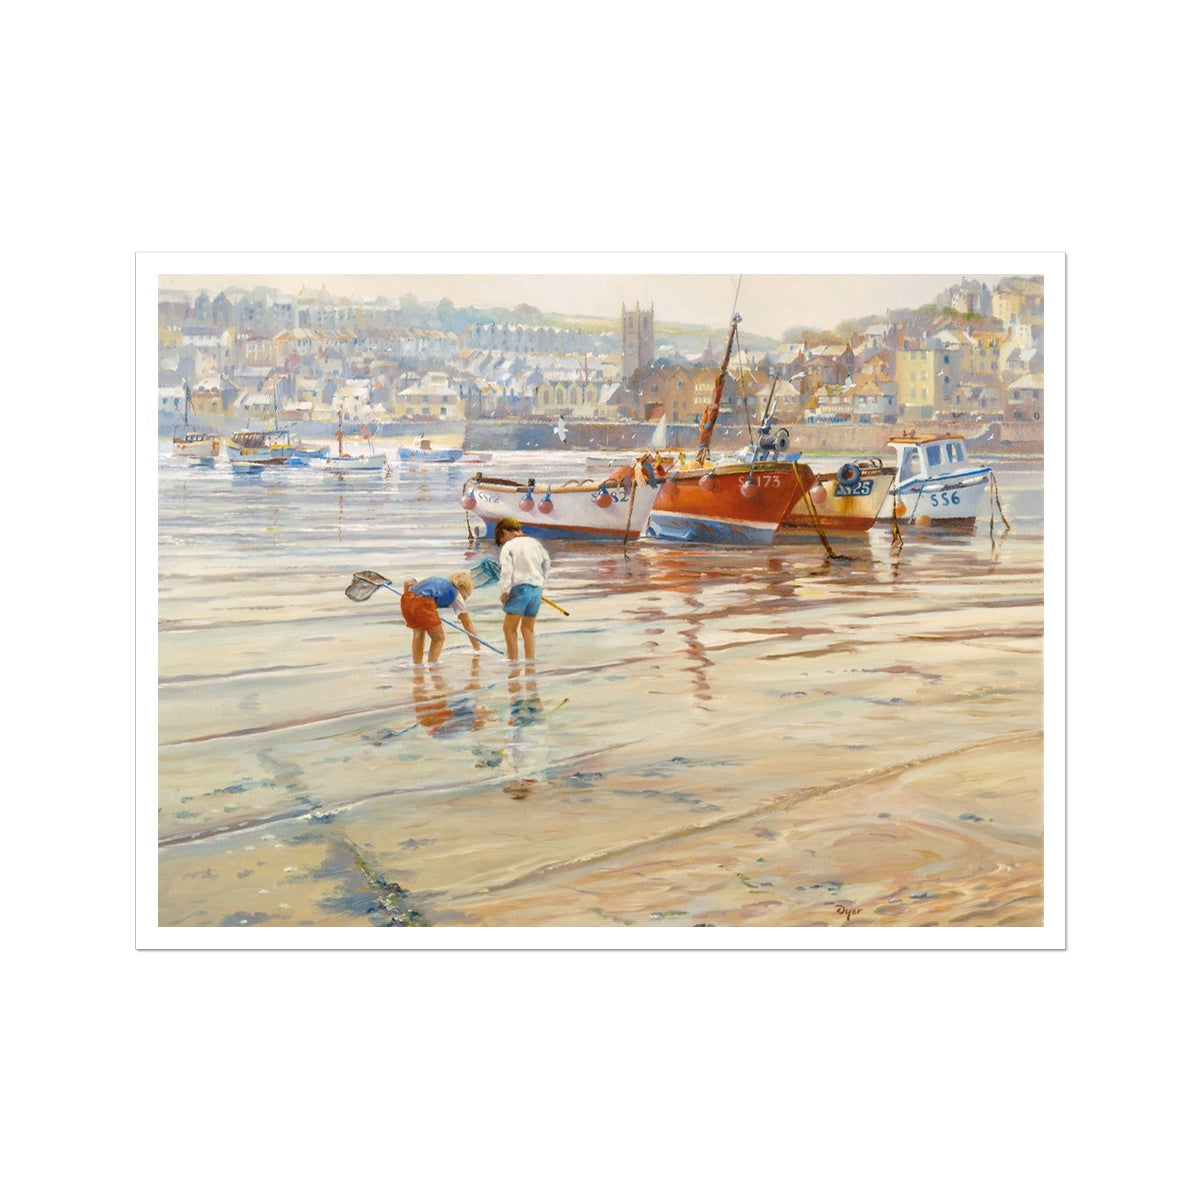 Ted Dyer Fine Art Print. Open Edition Cornish Art Print. 'Calm Waters, St Ives Harbour, Cornwall'. Cornwall Art Gallery